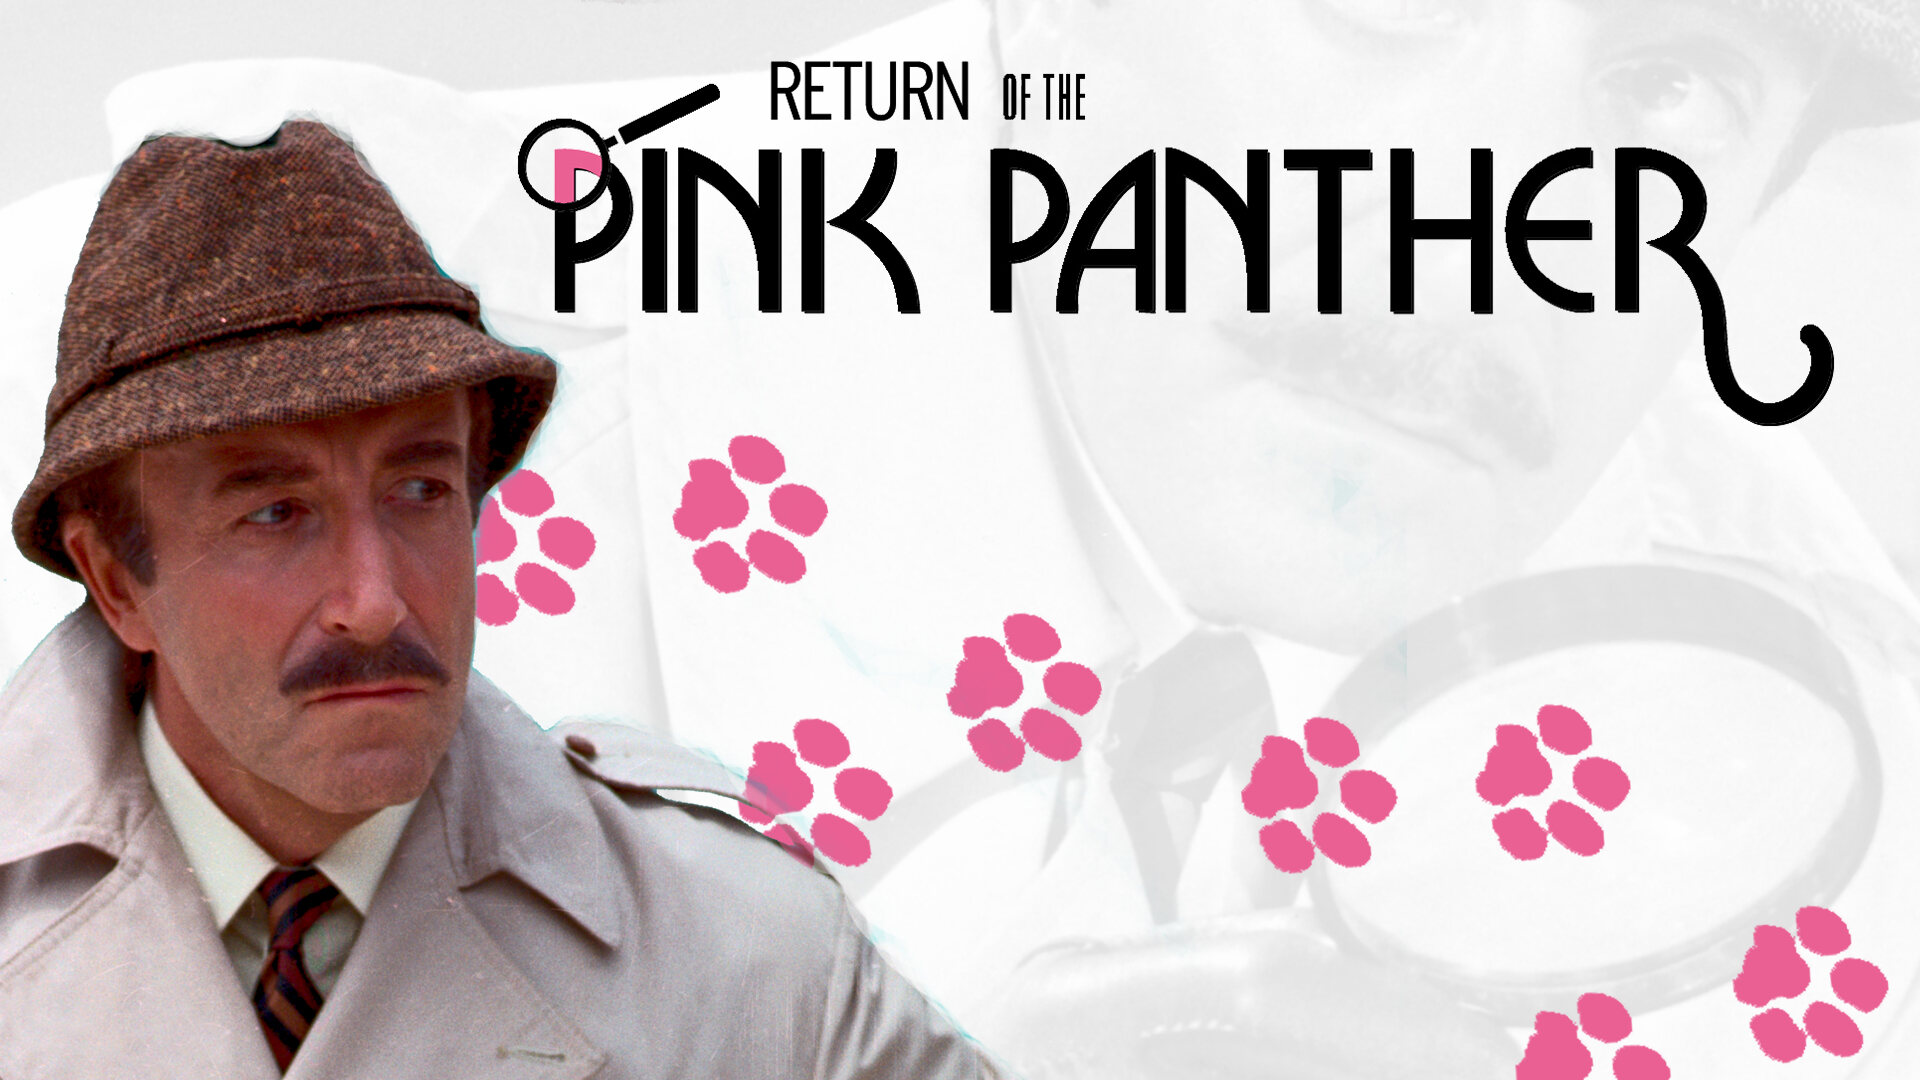 32-facts-about-the-movie-the-return-of-the-pink-panther